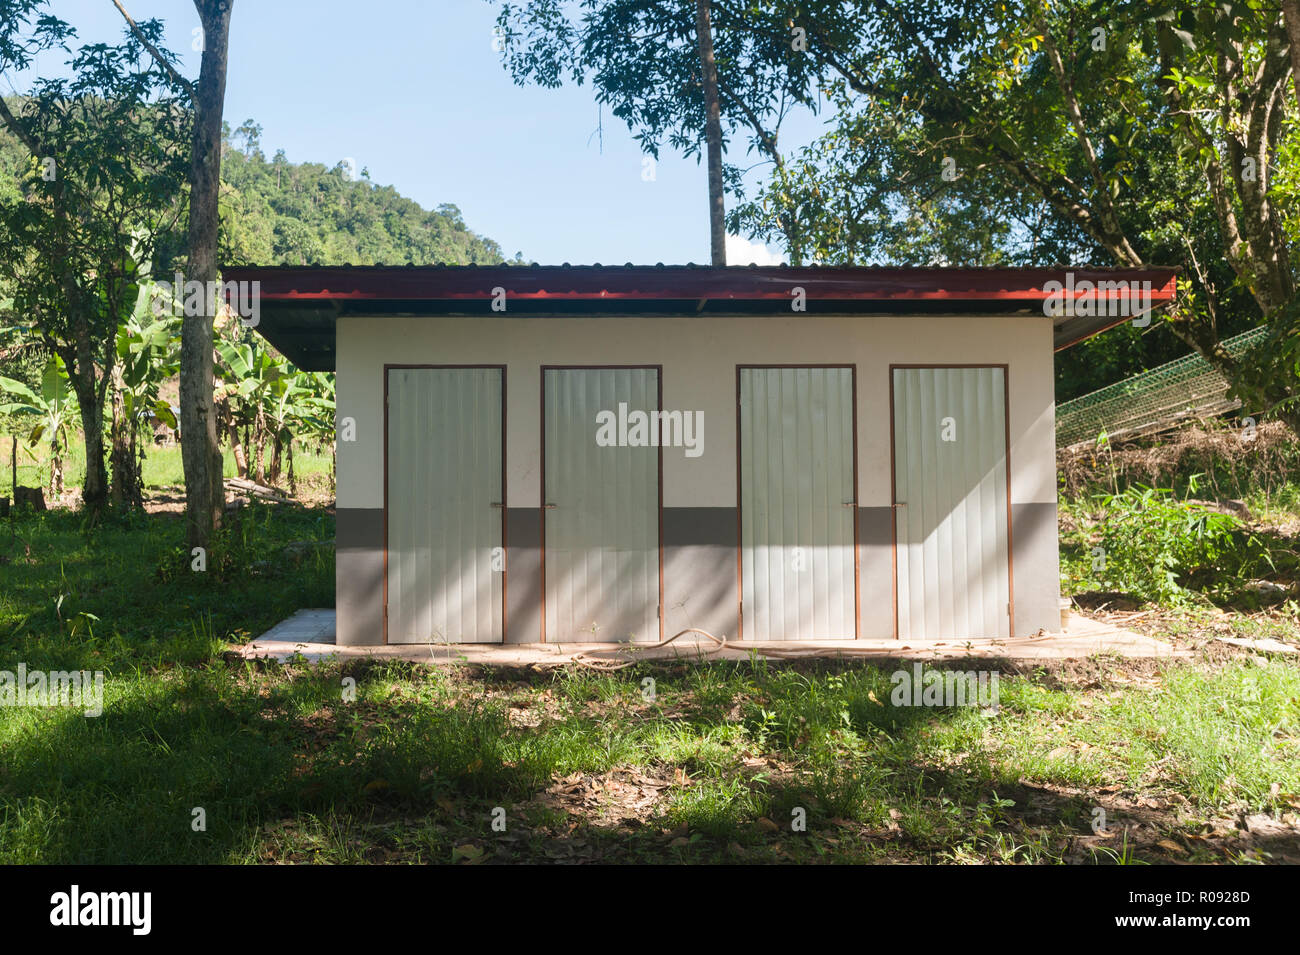 Toilet at camping site in Borneo. Stock Photo